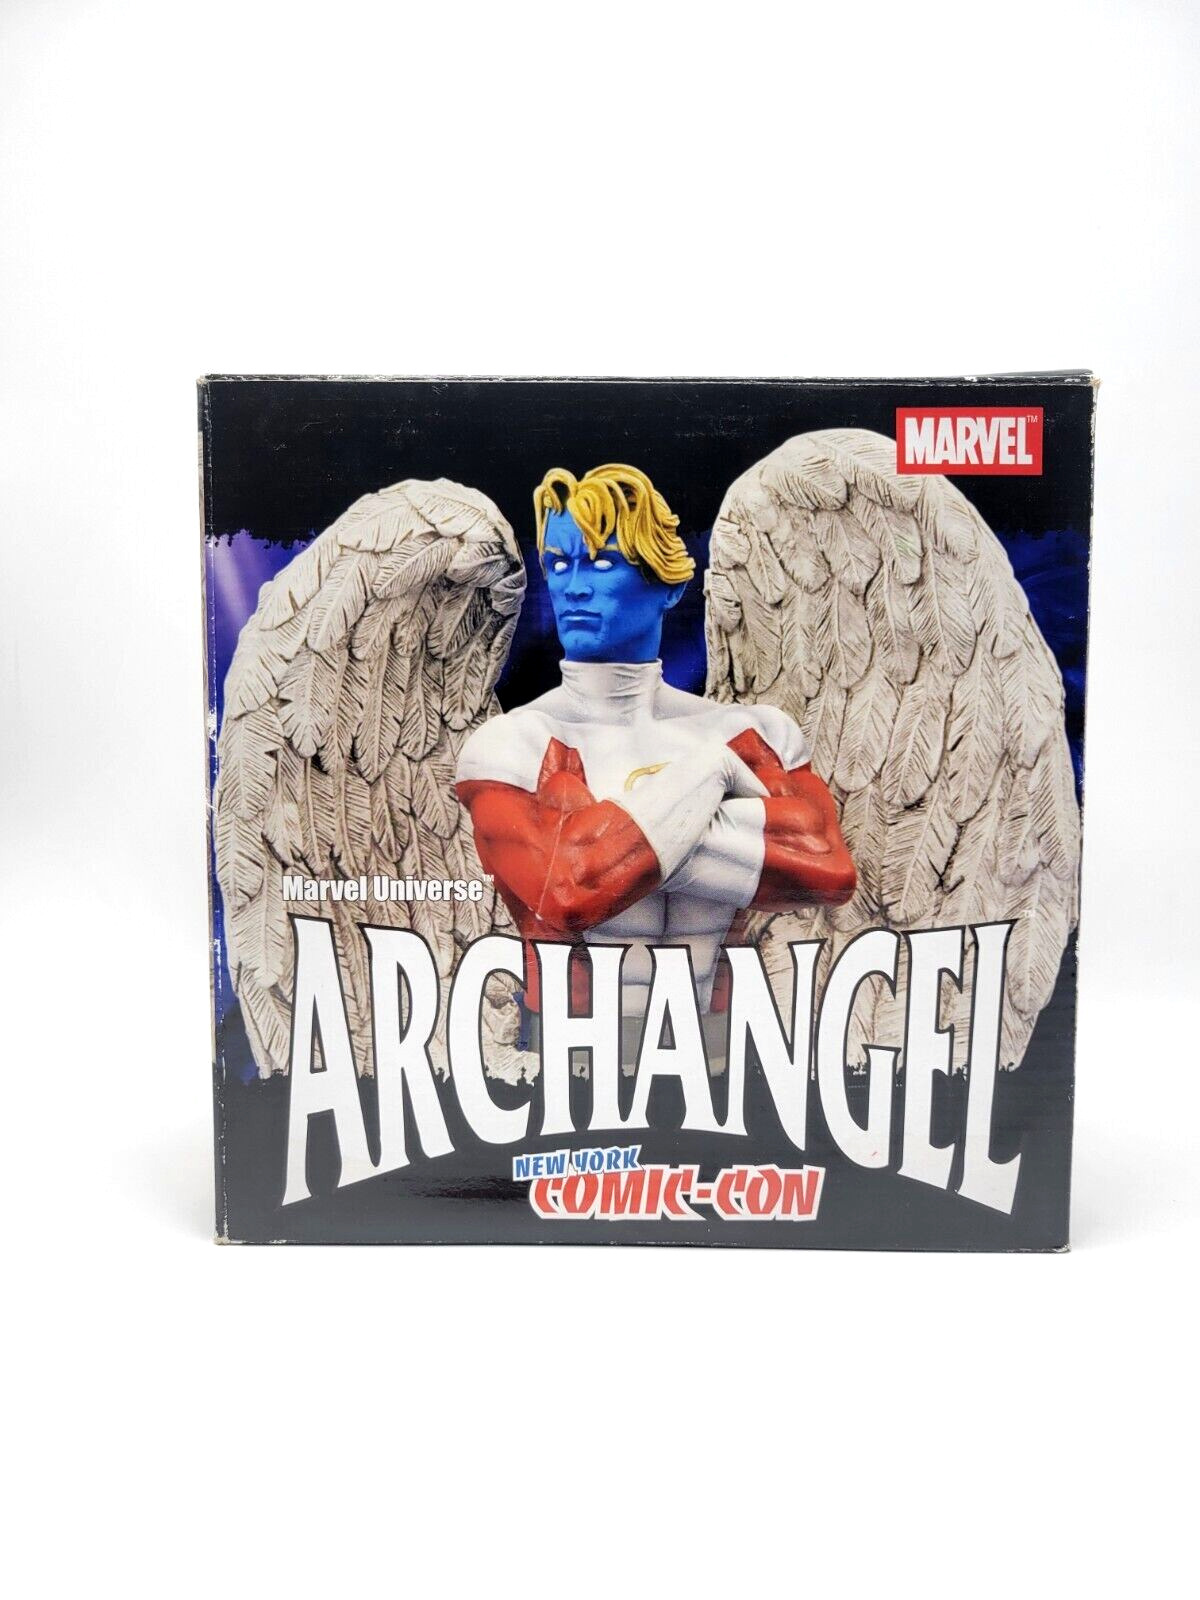 Archangel Marvel Bust NY Comic Con Exclusive Diamond Select 0/500 Artist\'s Proof